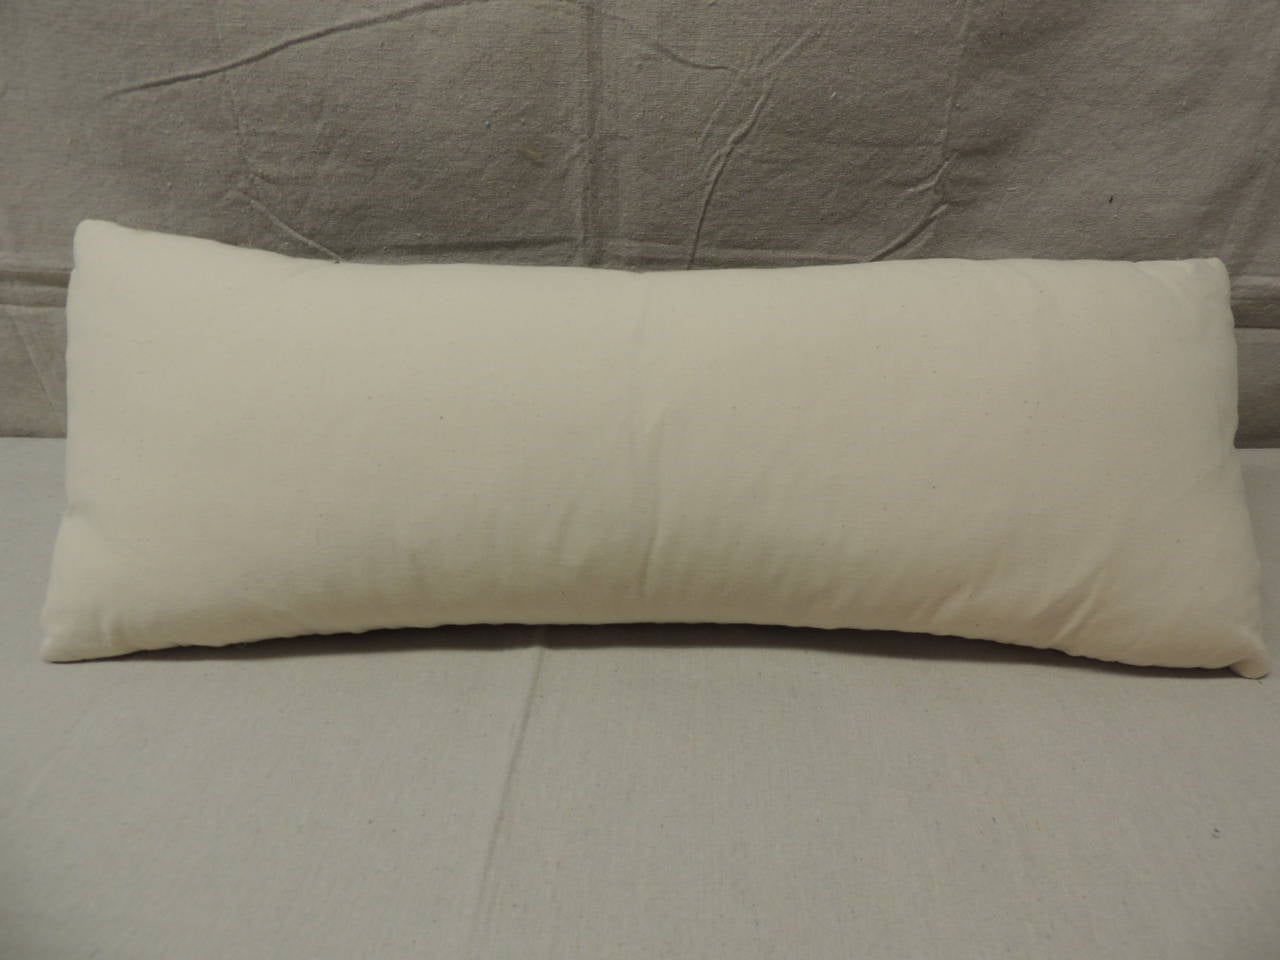 Hand-Crafted 19th Century Embroidery Turkish Bolster Decorative Textured Finish Pillow